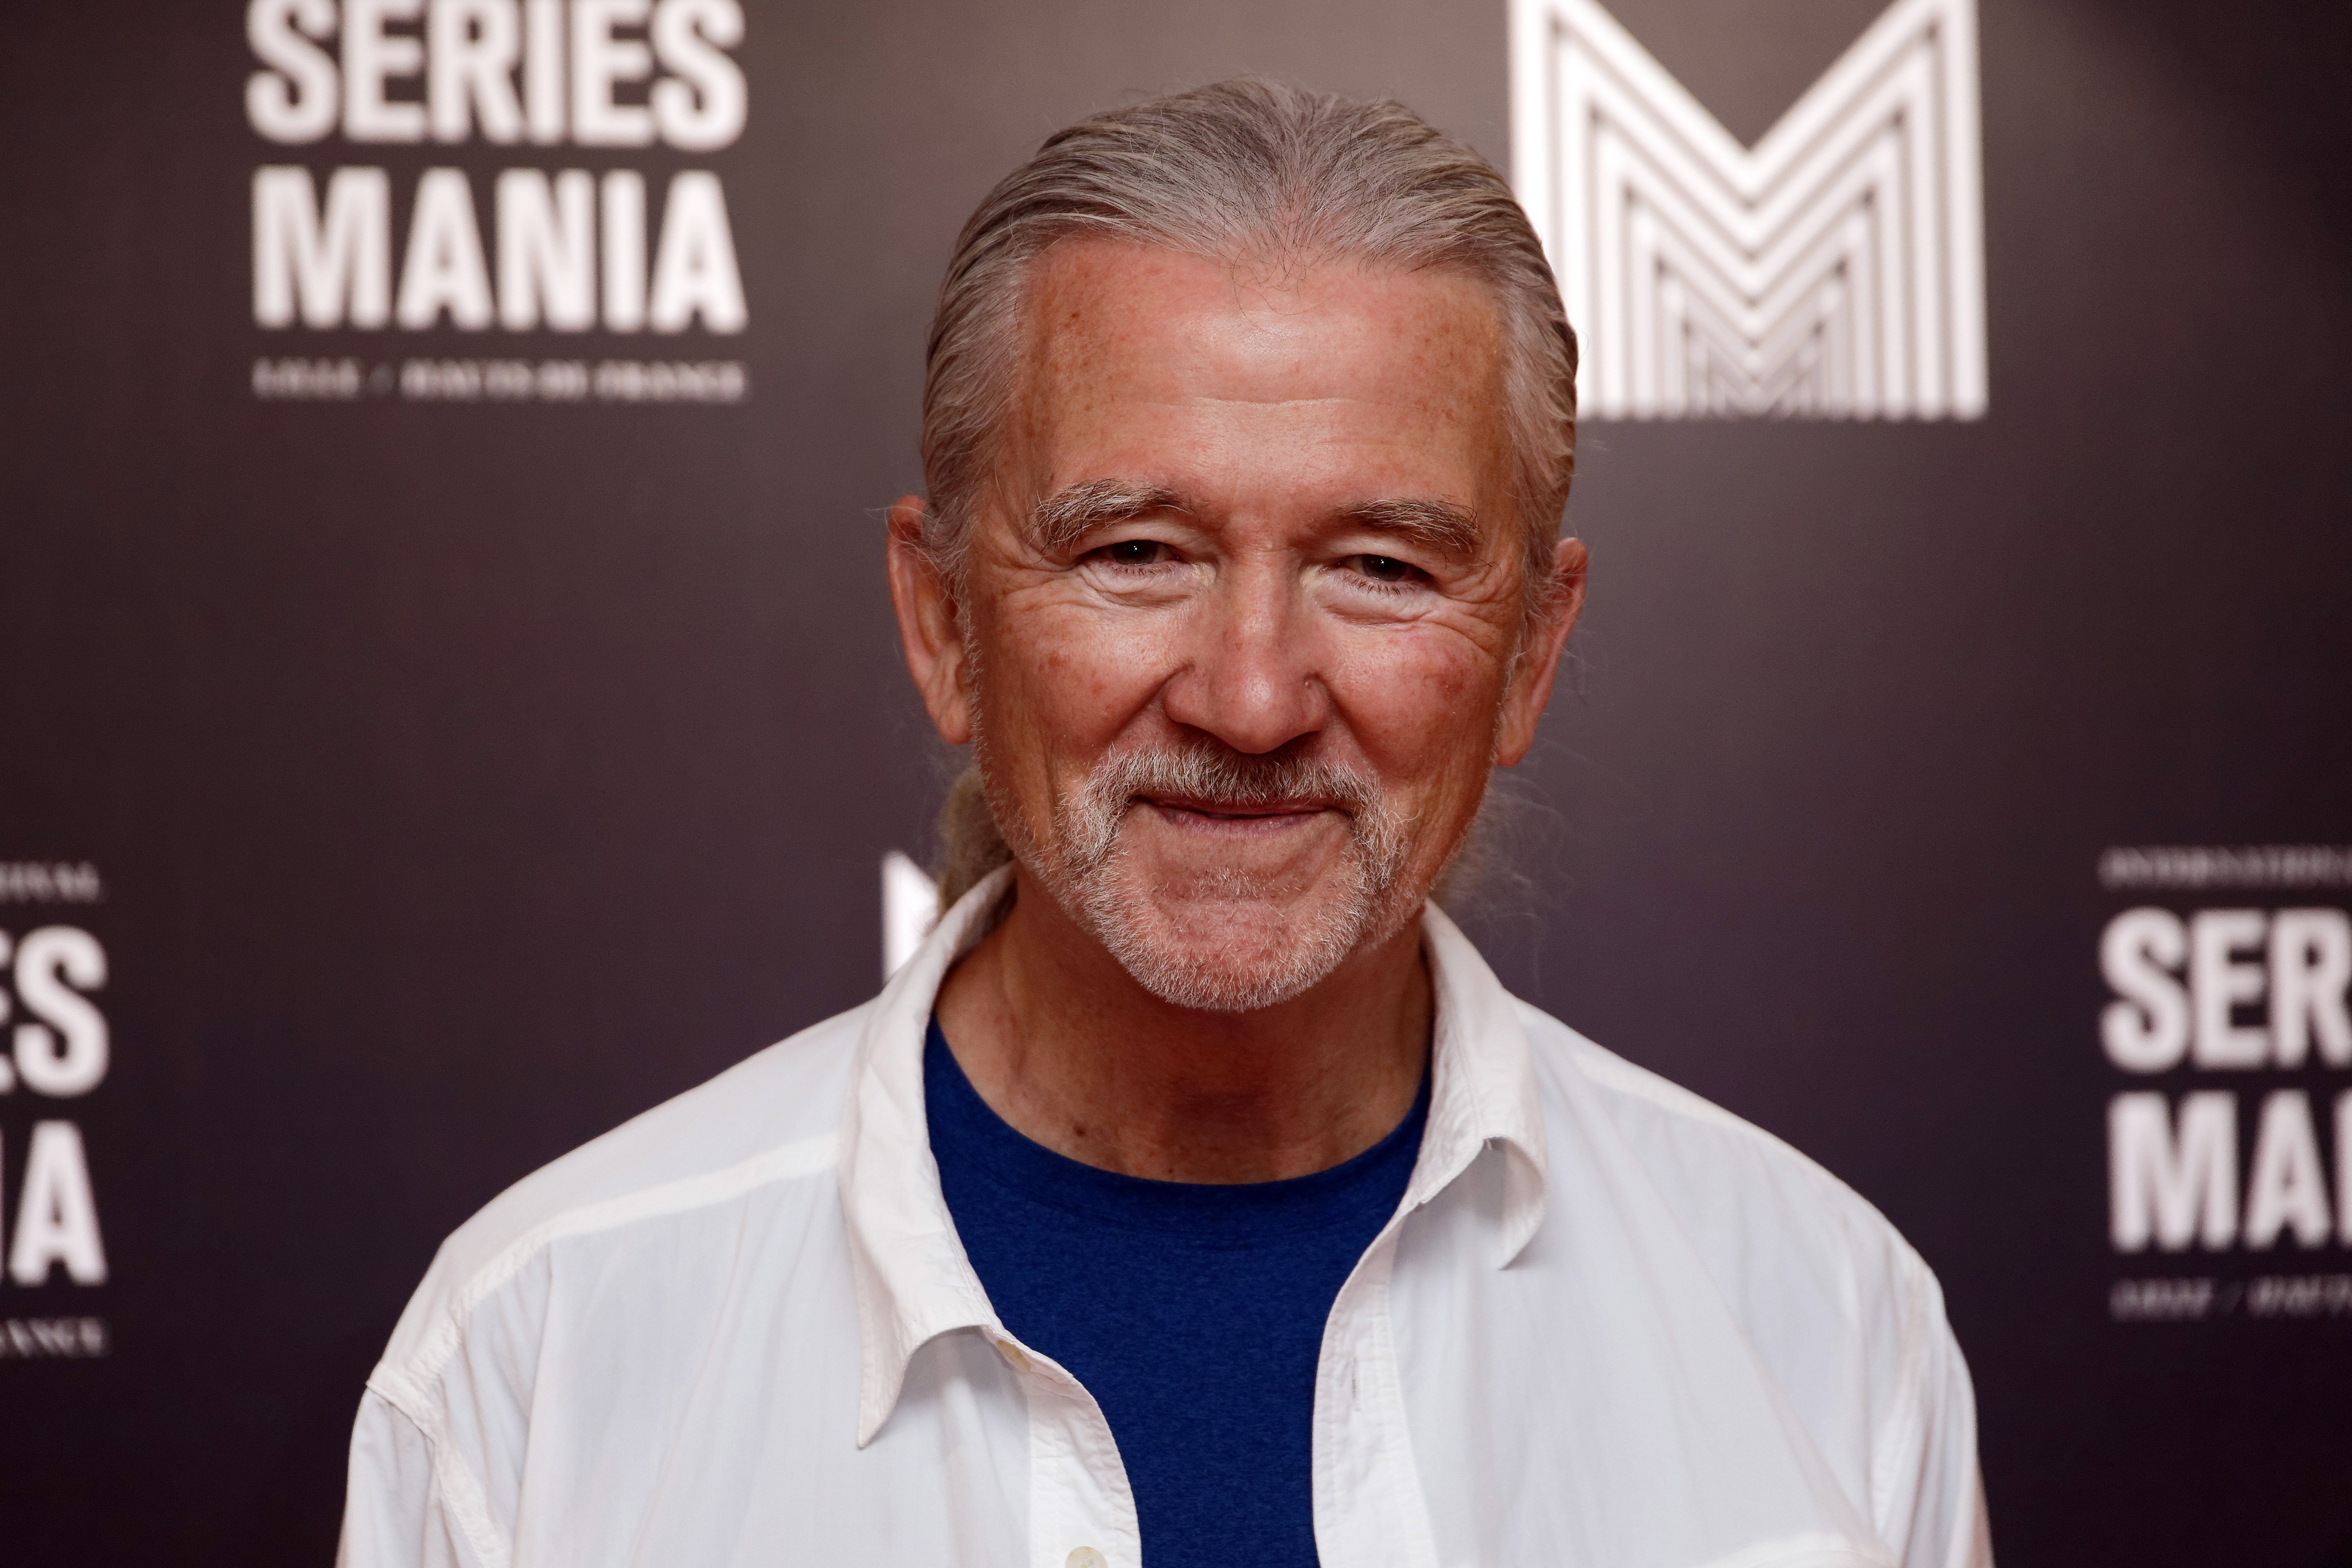 Veteran actor Patrick Duffy attends the Series Mania in Lille, France on  May 2, 2018. | Source: Getty Images